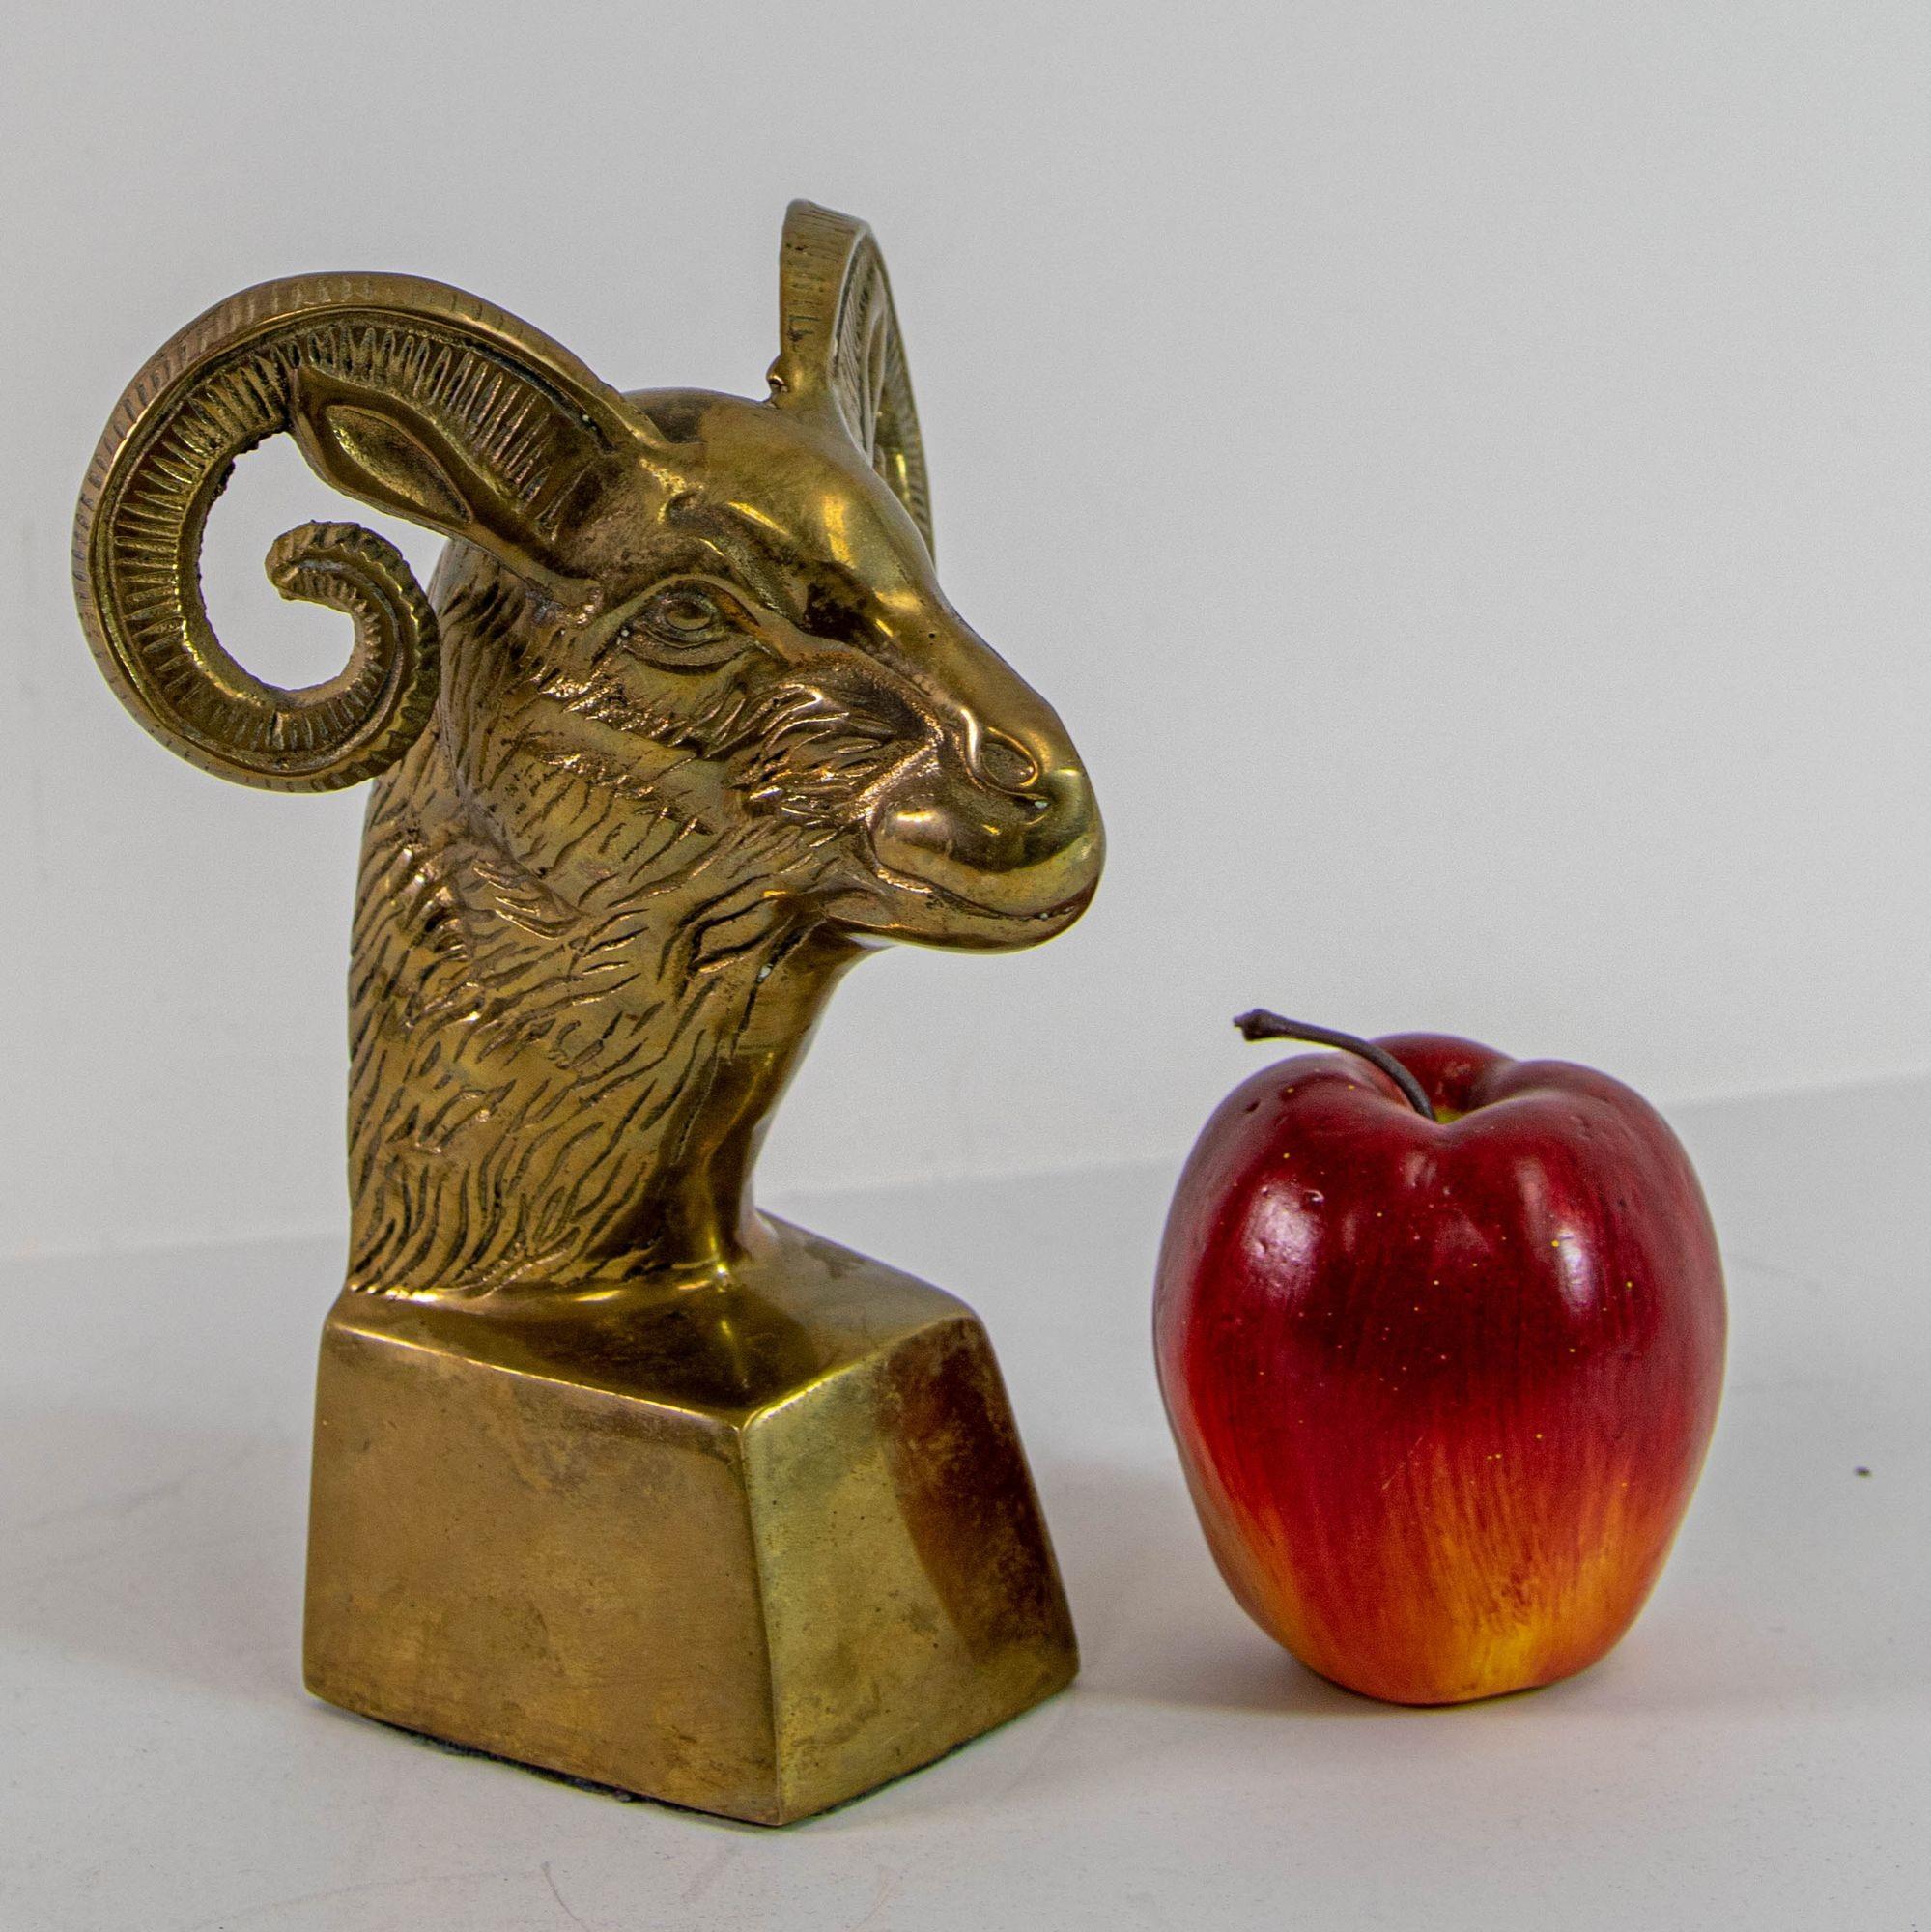 Vintage Brass Ram Paperweight Bookend 1950s Art Deco Style For Sale 3